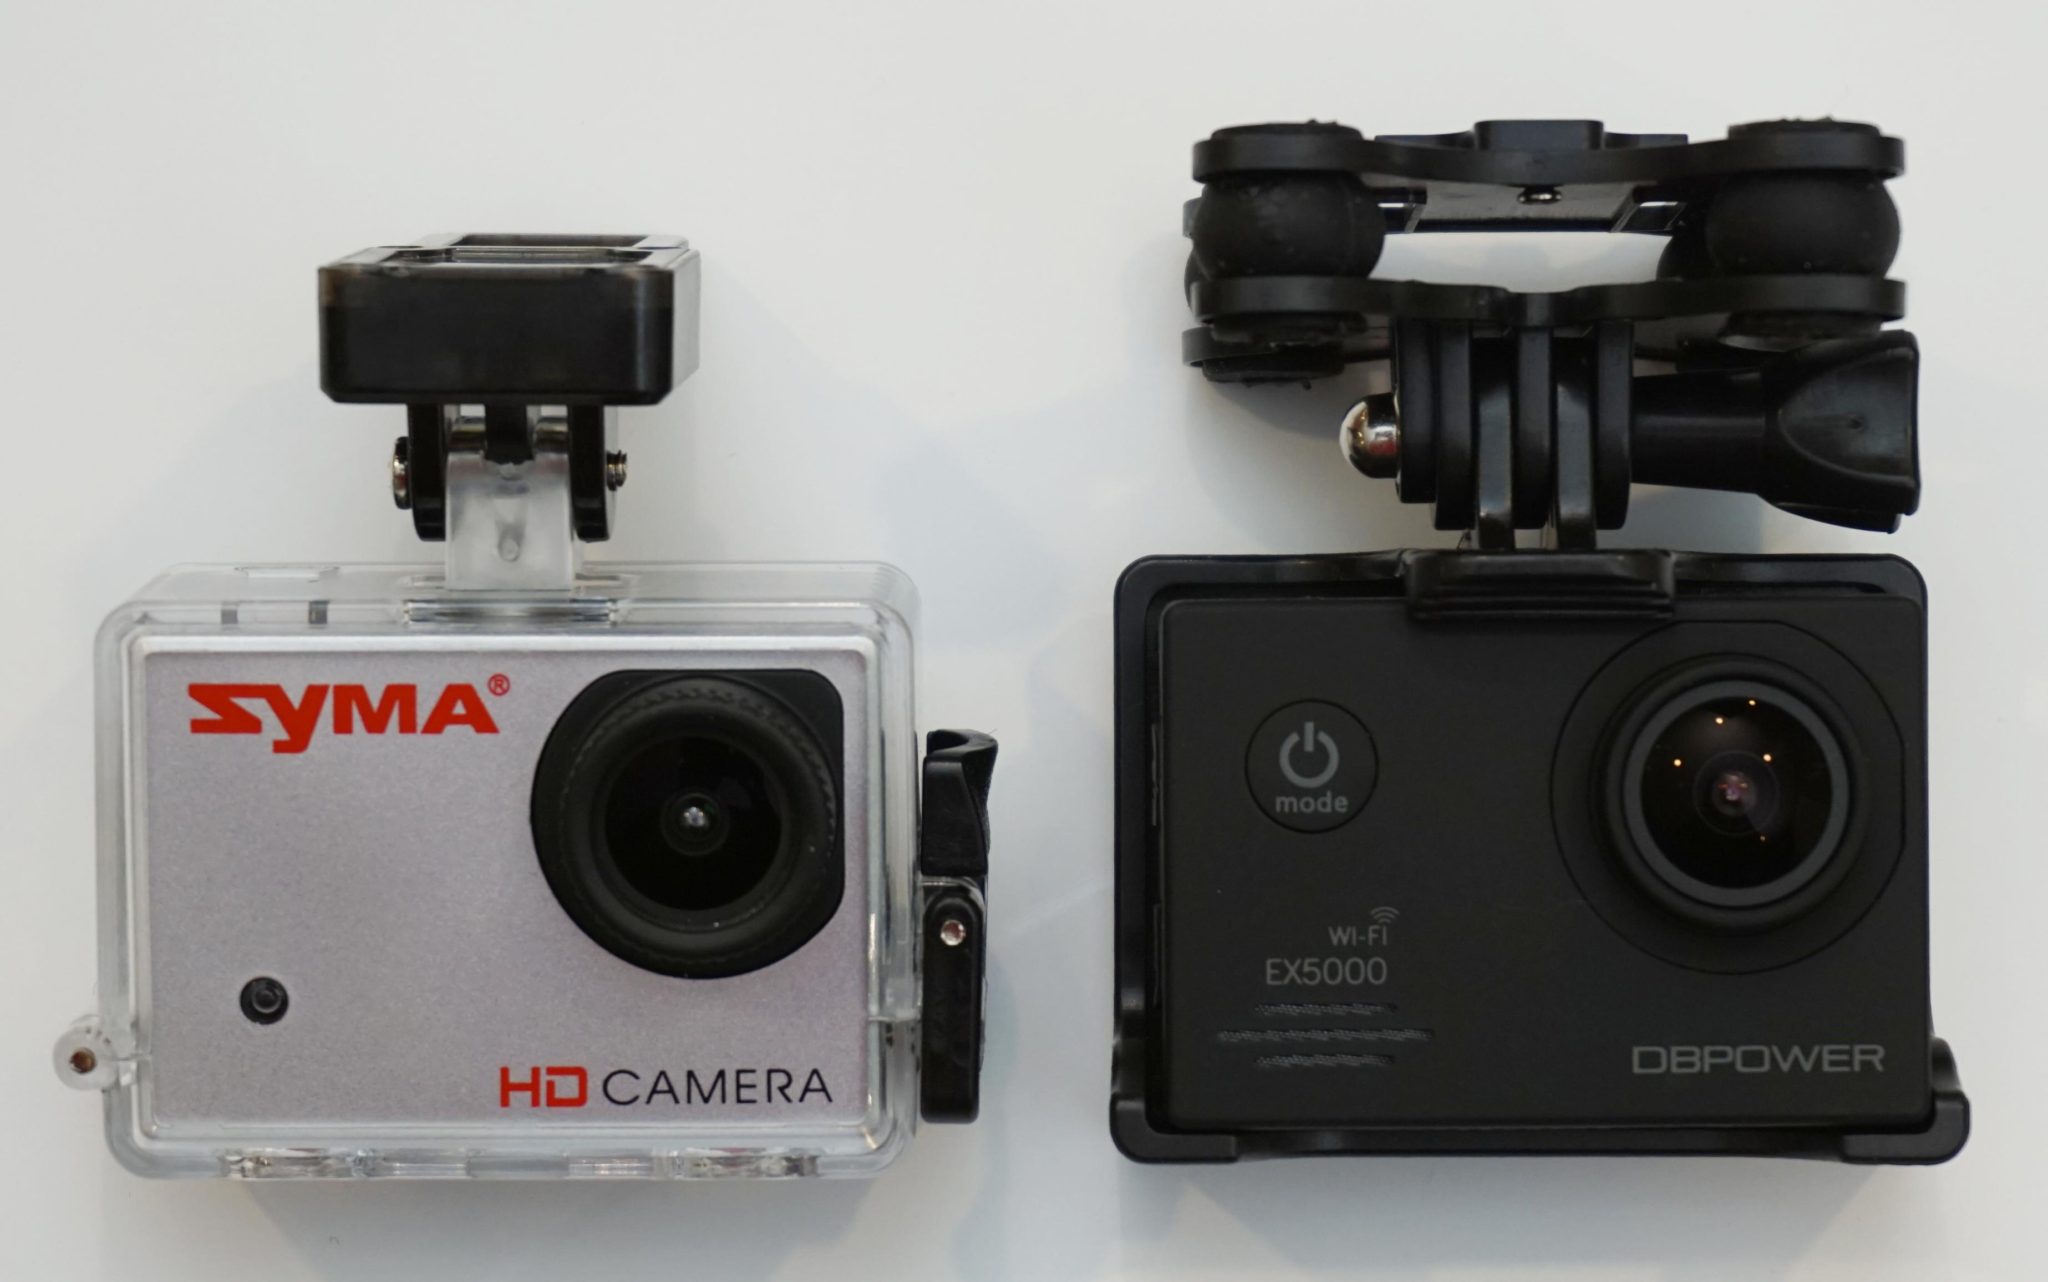 Syma G and DP Power Action Cameras